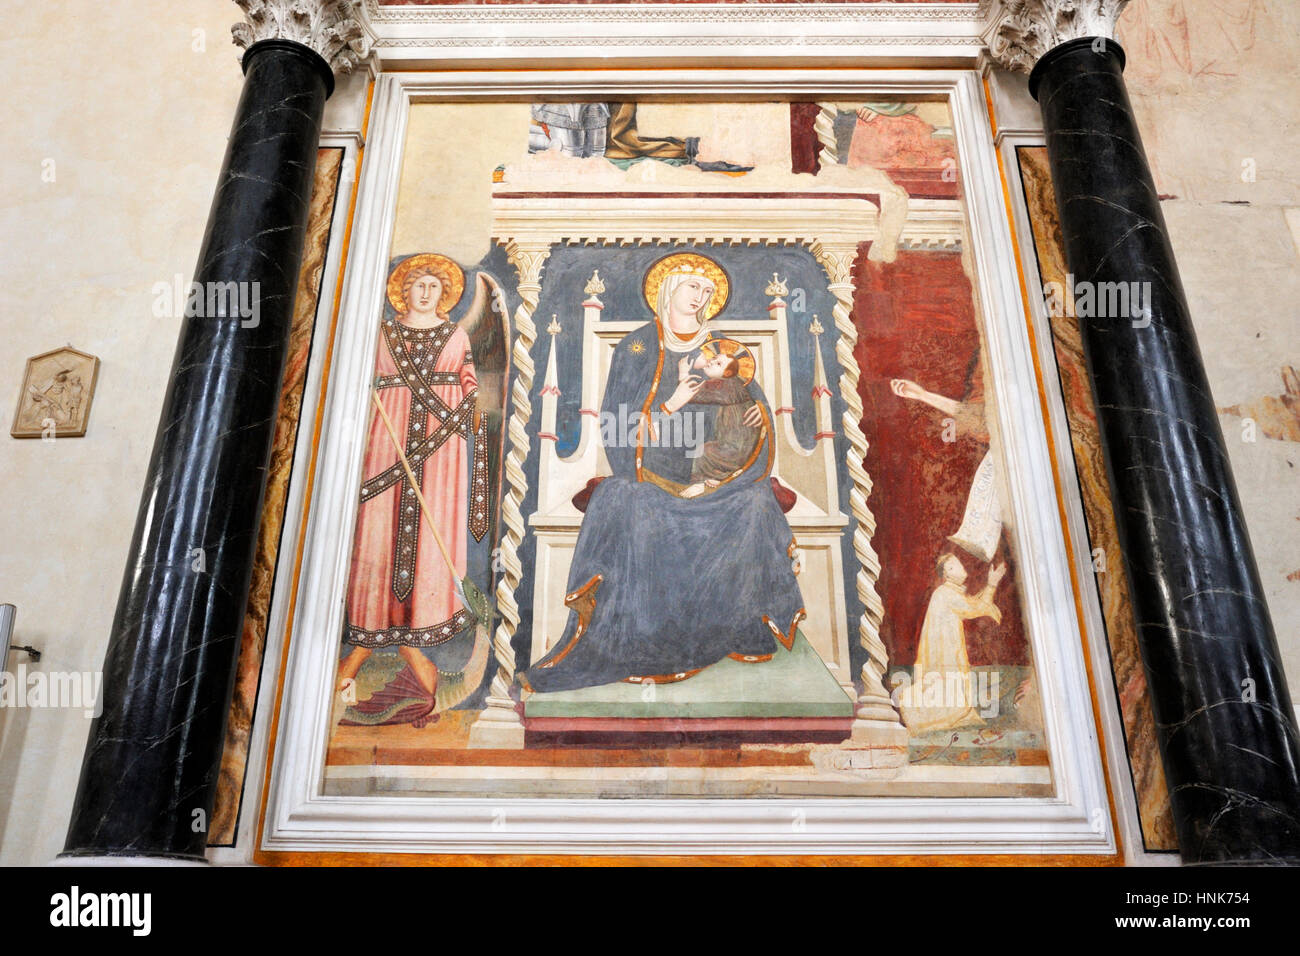 Madonna with baby, Madonna del Latte by Lippo Memmi AD 1317, the oldest fresco in San Gimignano, church of St Augustine, San Gimignano, Tuscany, Italy Stock Photo